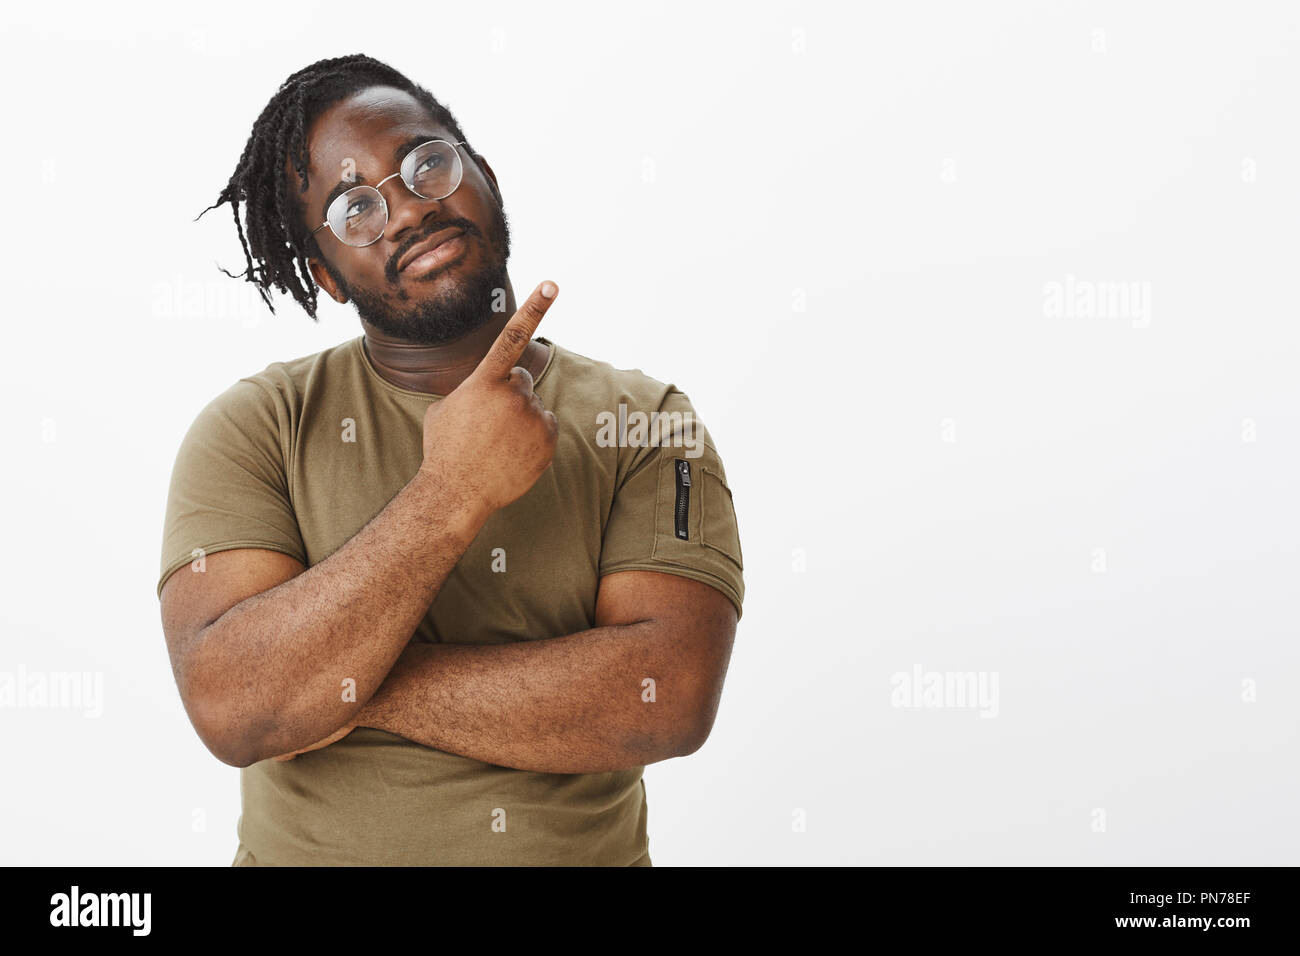 https://c8.alamy.com/comp/PN78EF/confident-joyful-dark-skinned-guy-in-trendy-glasses-holding-hand-crossed-on-chest-and-pointing-at-upper-right-corner-with-index-finger-gazing-at-direction-with-satisfied-dreamy-expression-PN78EF.jpg